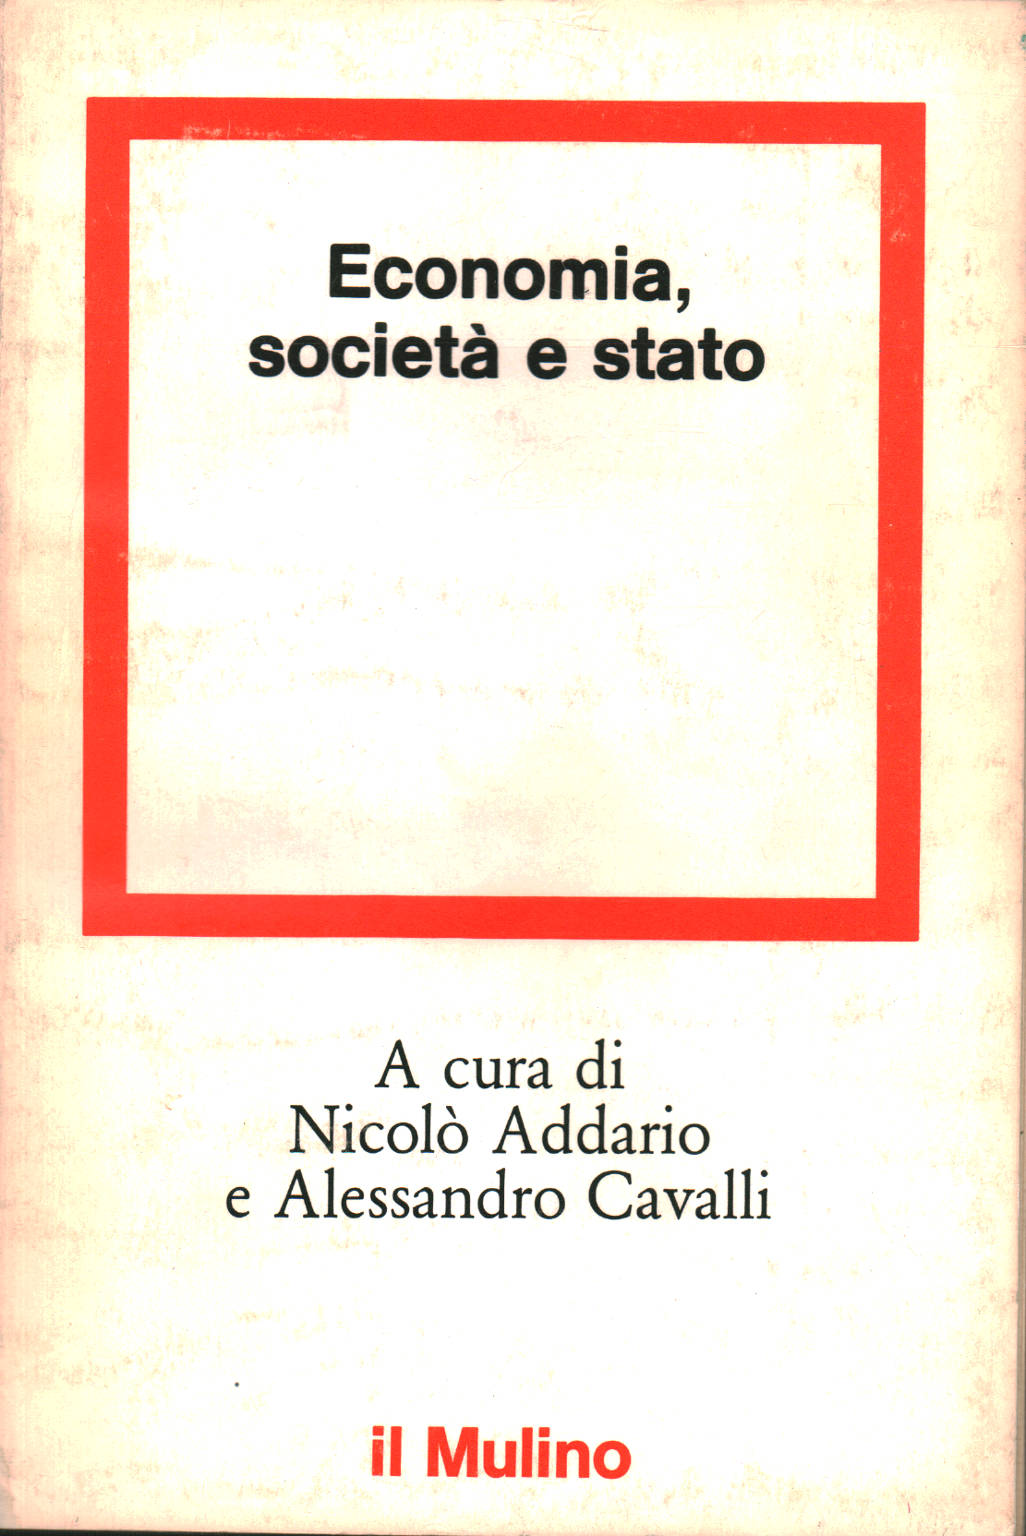 Economy, society and state